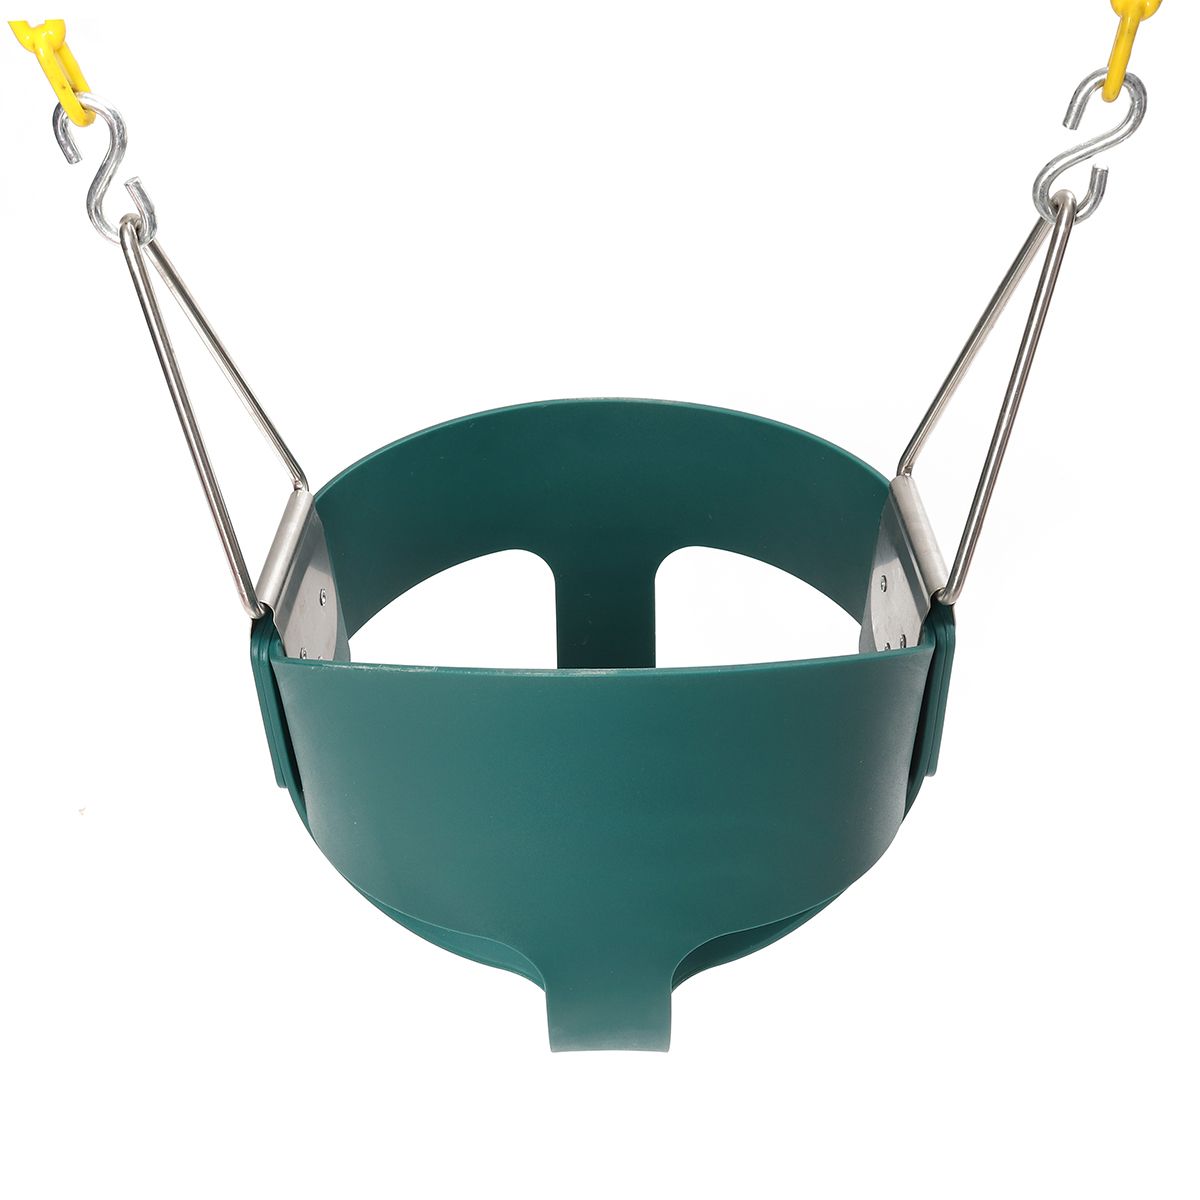 Fully-Assembled-High-Back-Baby-Swing-Seat-Full-Bucket-Toddler-Playground-Park-Home-Garden-Cradle-1400539